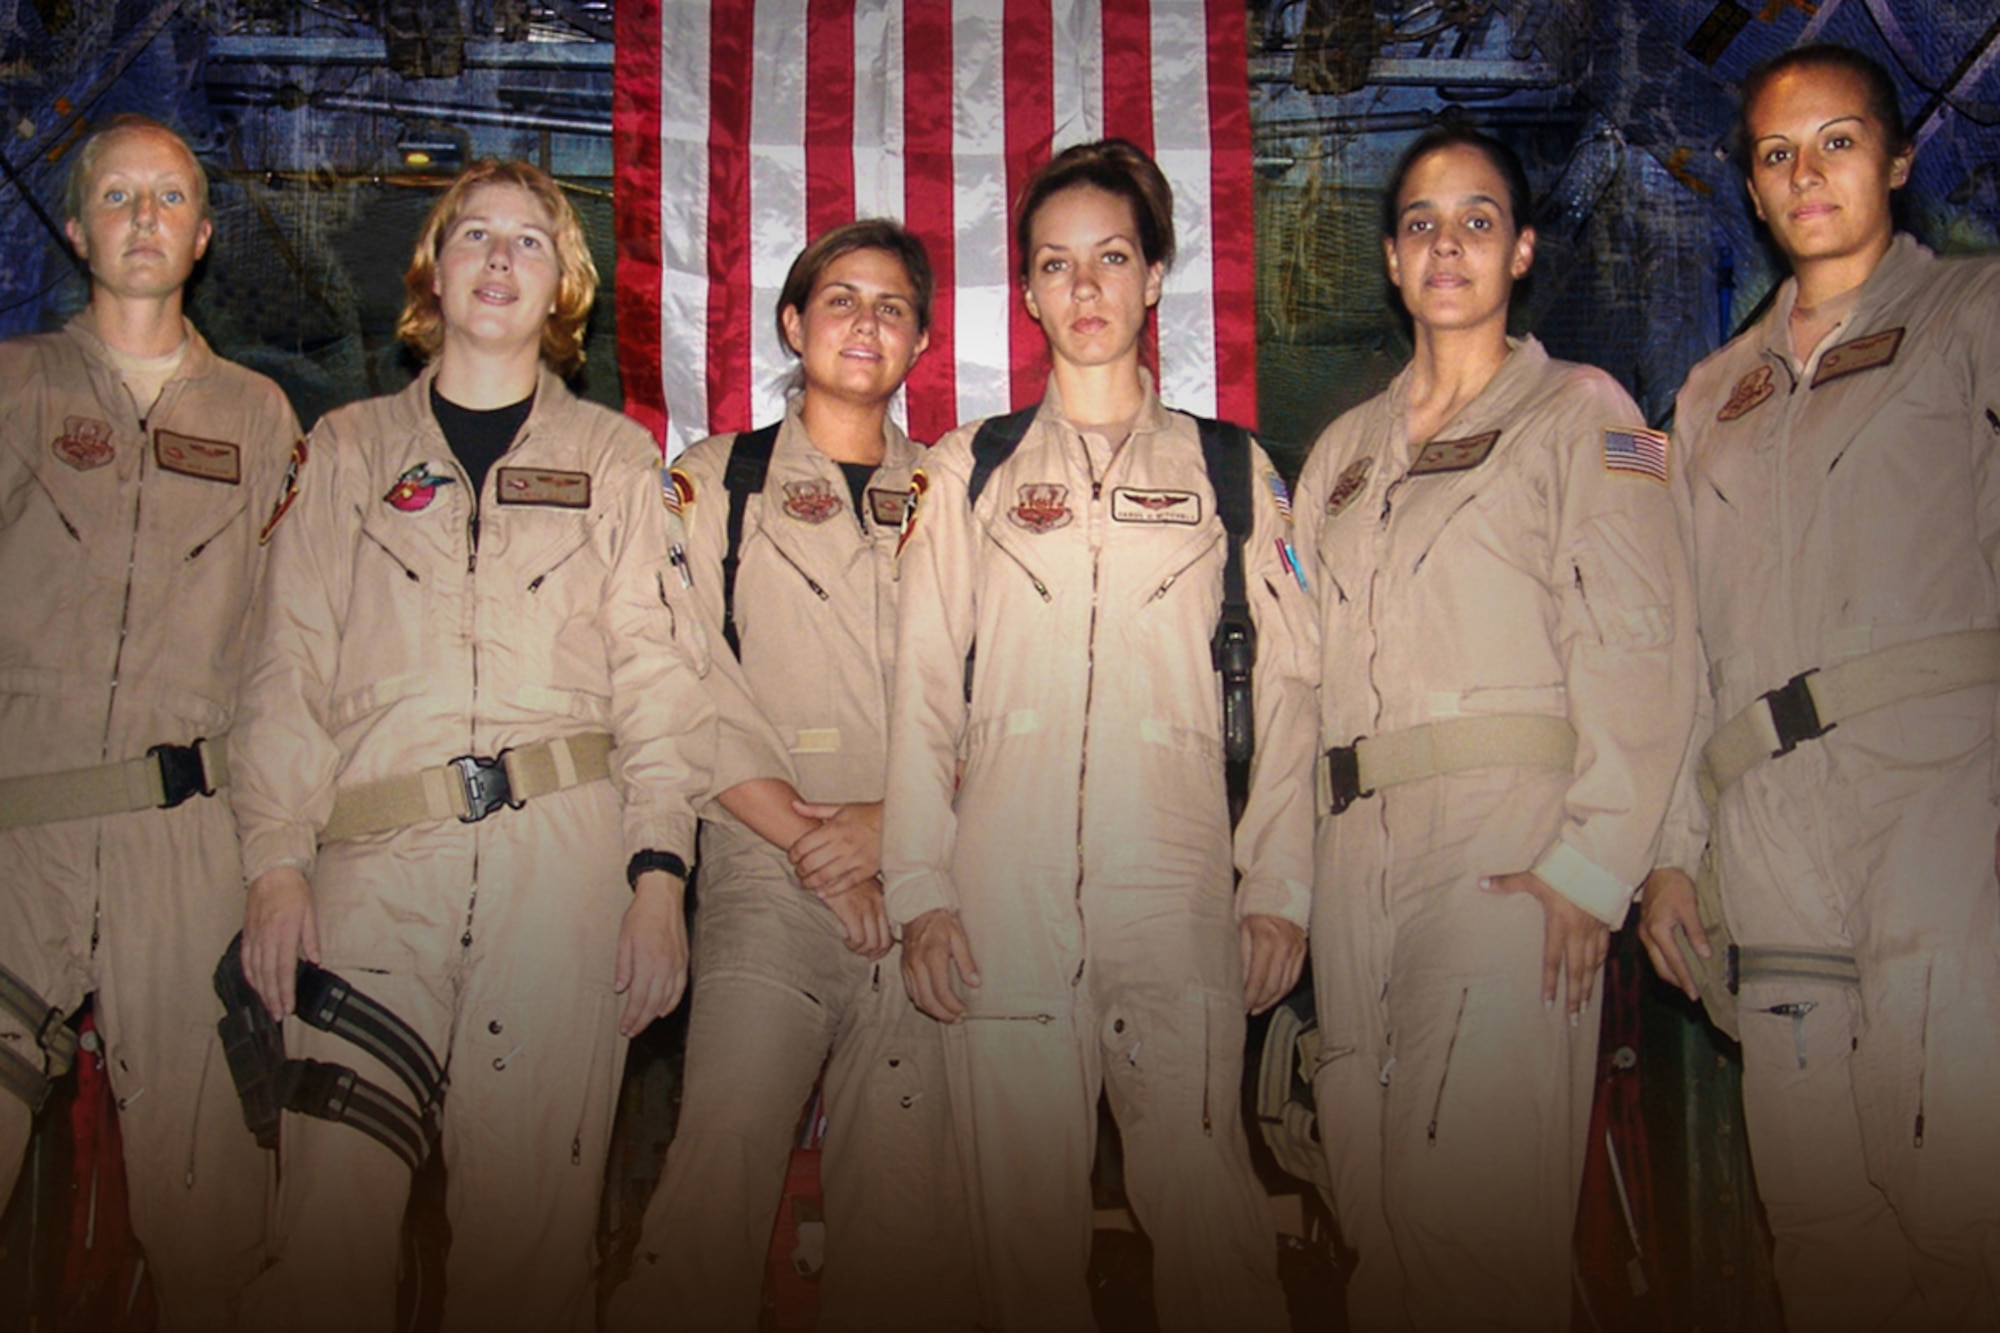 Recognized on Aug. 26, Women’s Equality Day was first enacted in 1971 to acknowledge the 1920 passage of the nineteenth amendment, giving women the right to vote, also known as suffrage. (Photo courtesy of the Air Force News Agency)